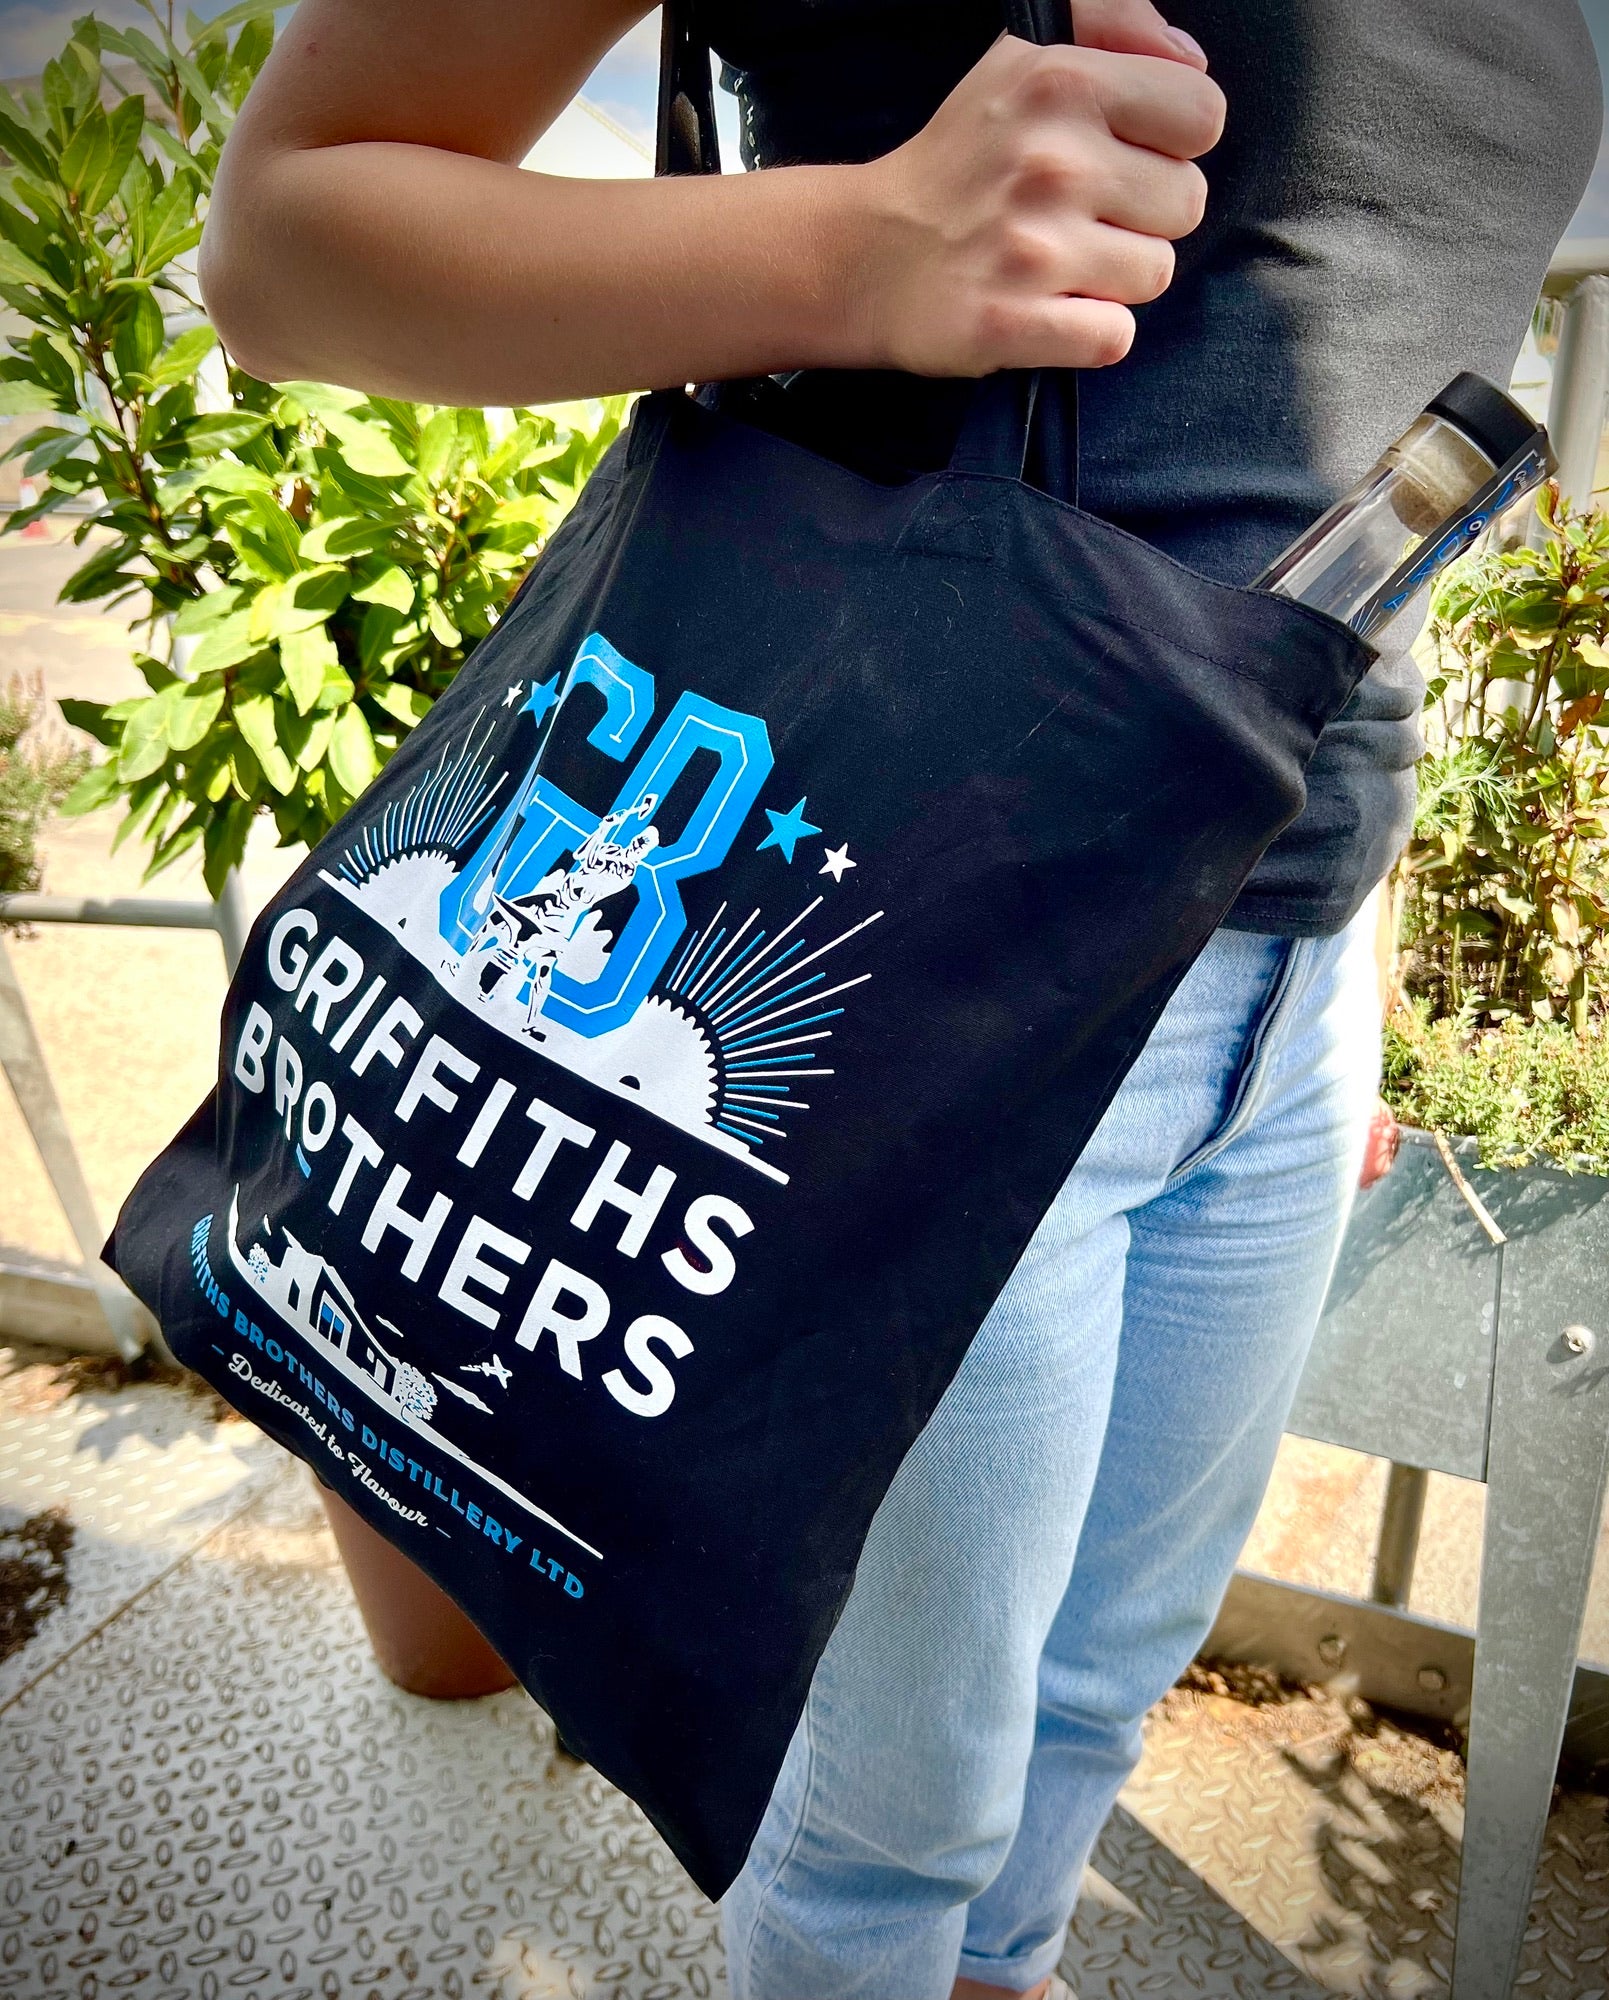 Griffiths Brothers Branded Tote Bag